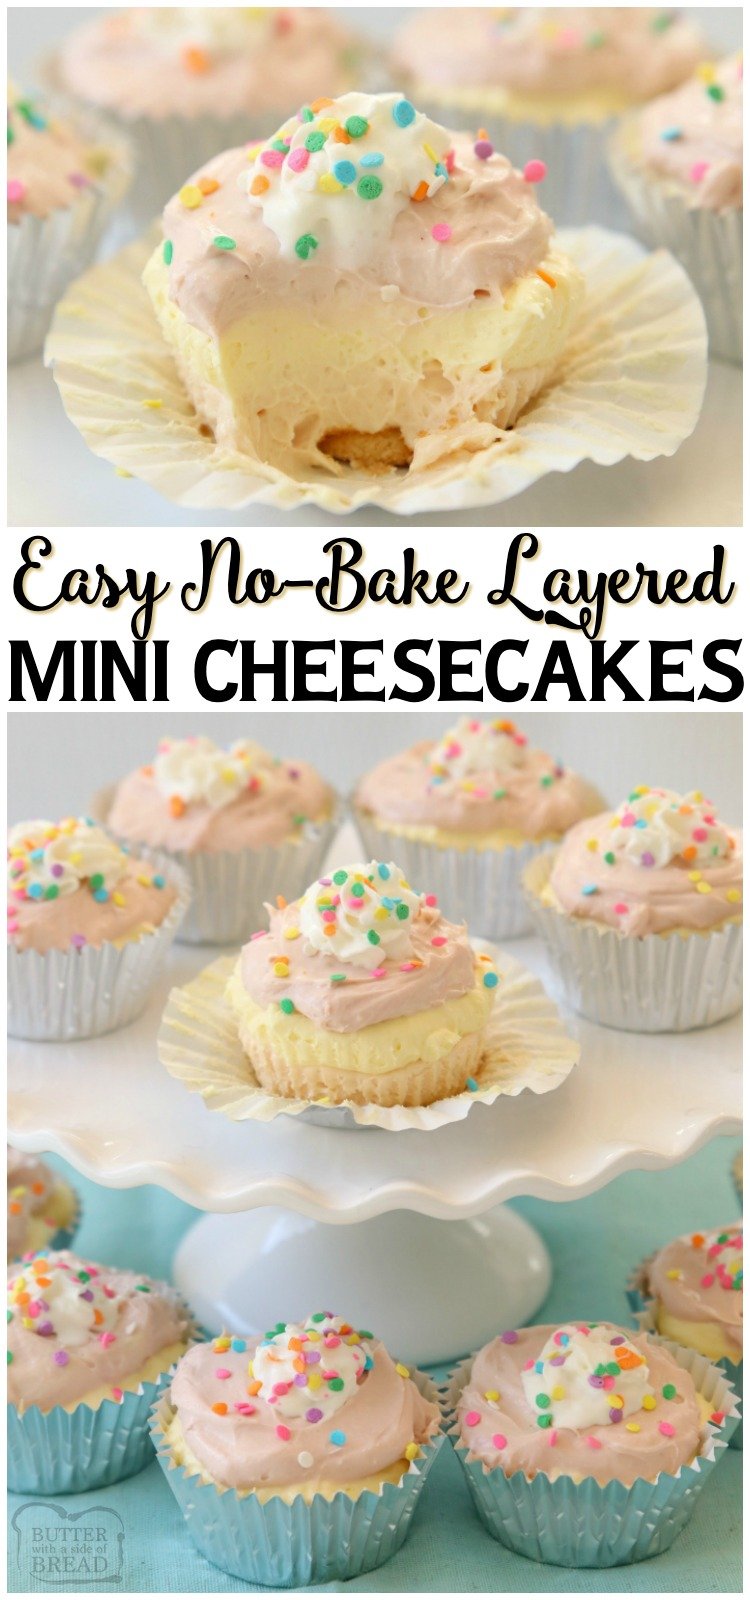 Mini No-Bake Cheesecakes perfect for Spring! Easy pastel desserts with sweet, creamy vanilla cheesecake filling that's put together in minutes. #cheesecake #nobake #Easter #pastel #dessert #recipe #Nillawafers from BUTTER WITH A SIDE OF BREAD